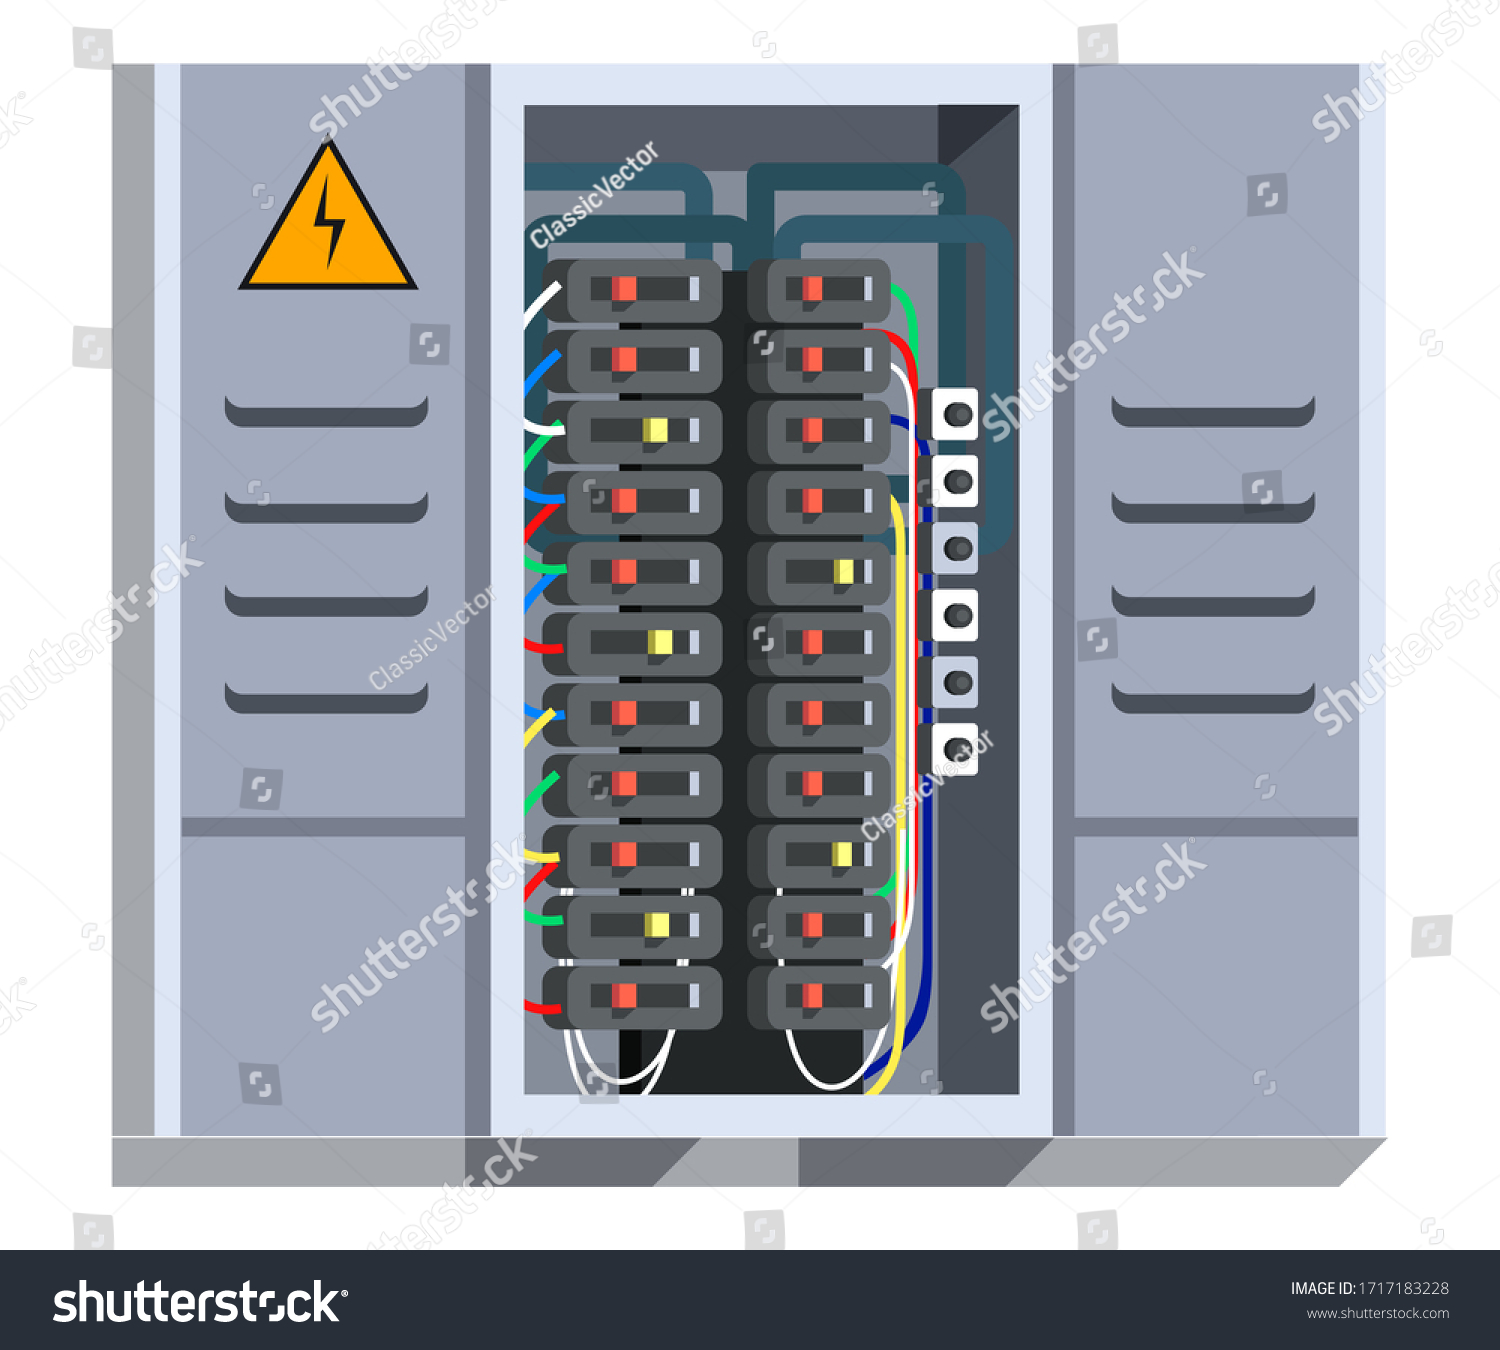 SVG of Electrical panel with switcher, fuse, contactor, wire, automatic circuit breaker isolated on white background. Stainless steel switchboard box. Wiring maintenance repair service. Power distribution svg